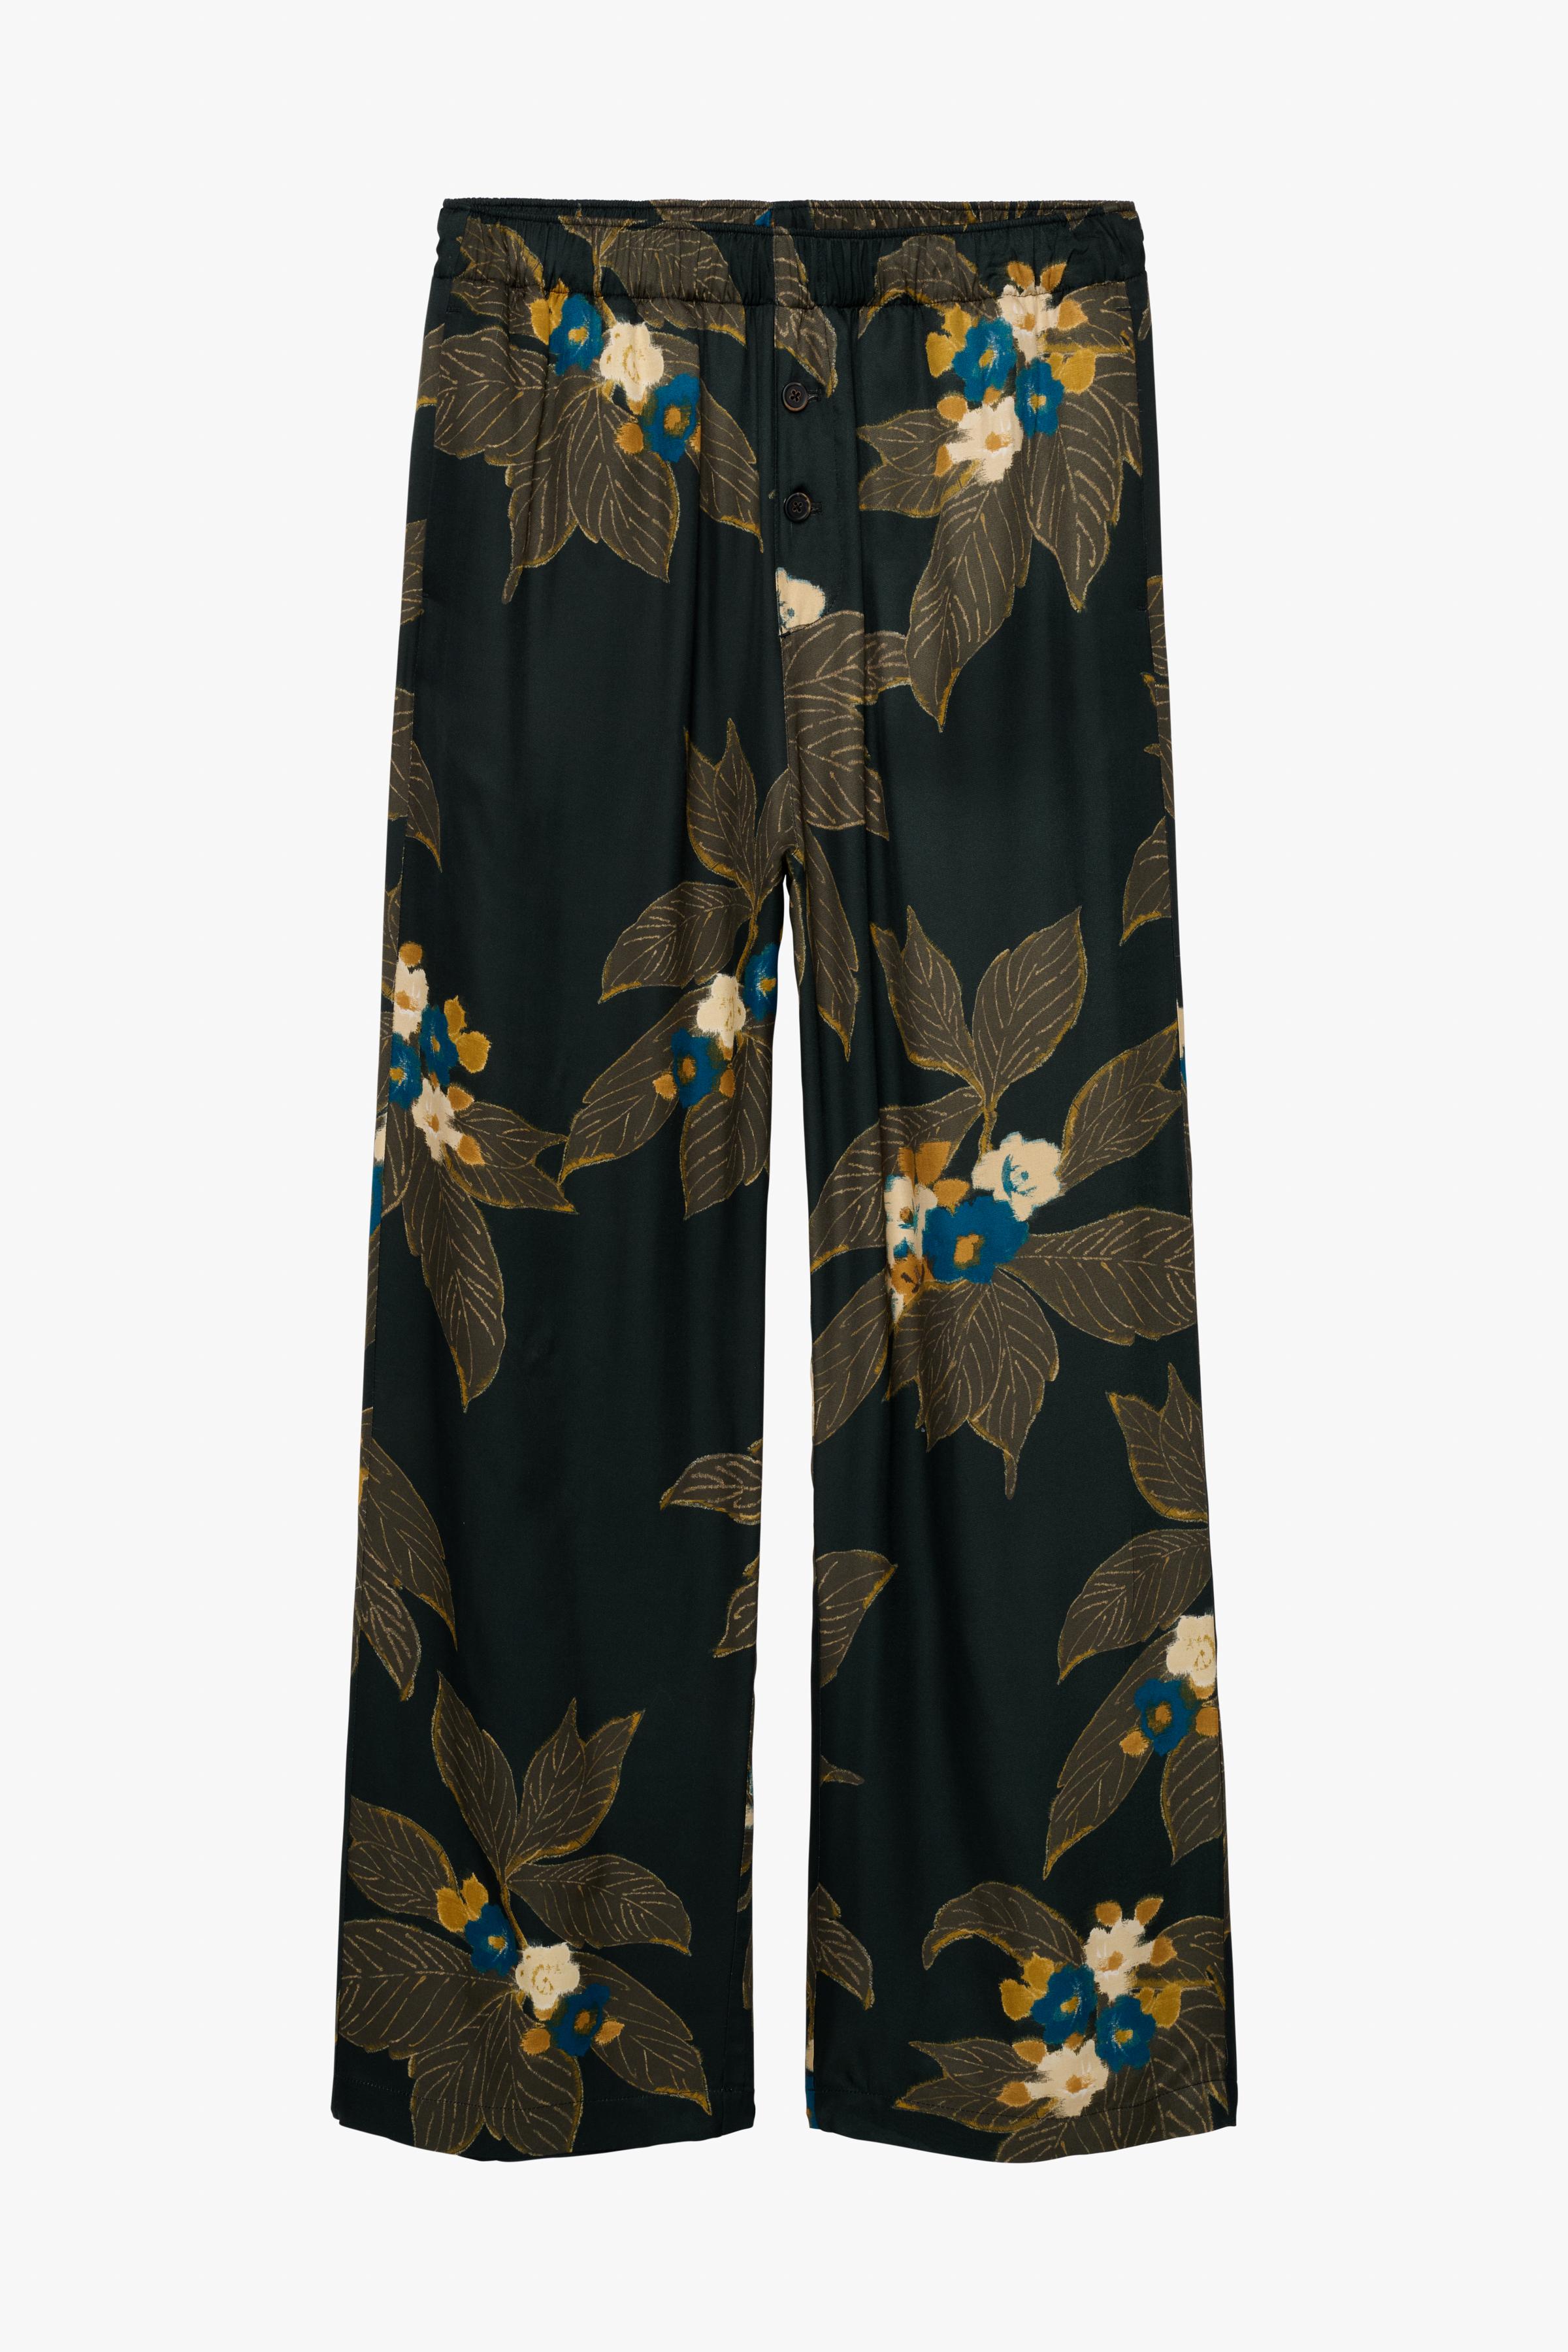 Zara Floral Print Trousers + Style With a Smile Link Up - Style Splash